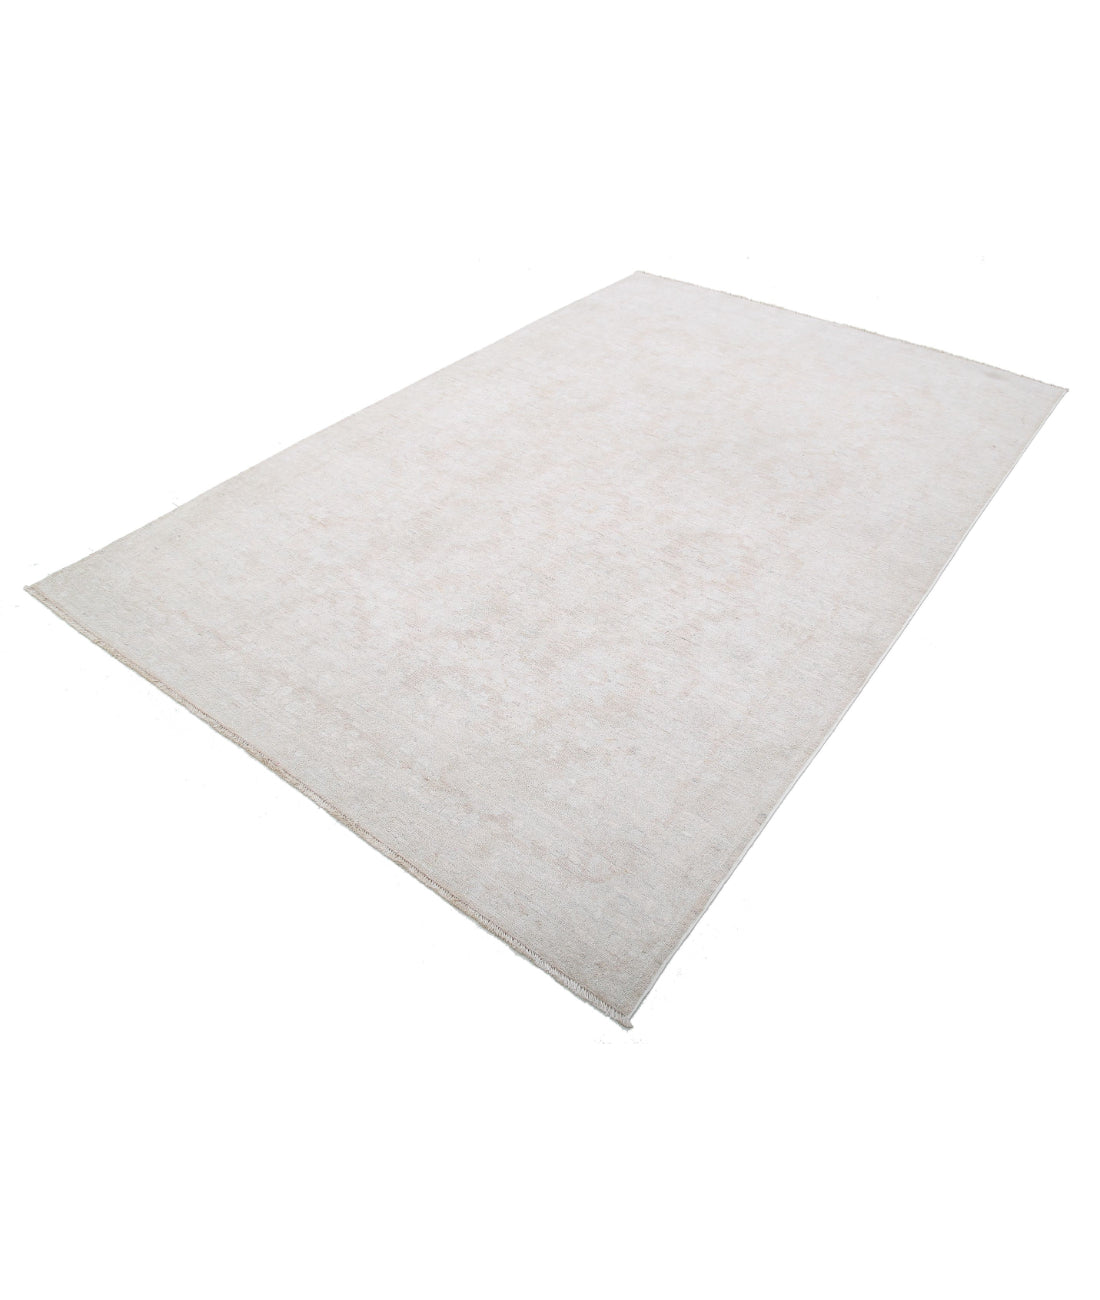 Hand Knotted Serenity Wool Rug - 5'10'' x 8'10'' 5'10'' x 8'10'' (175 X 265) / Grey / Ivory